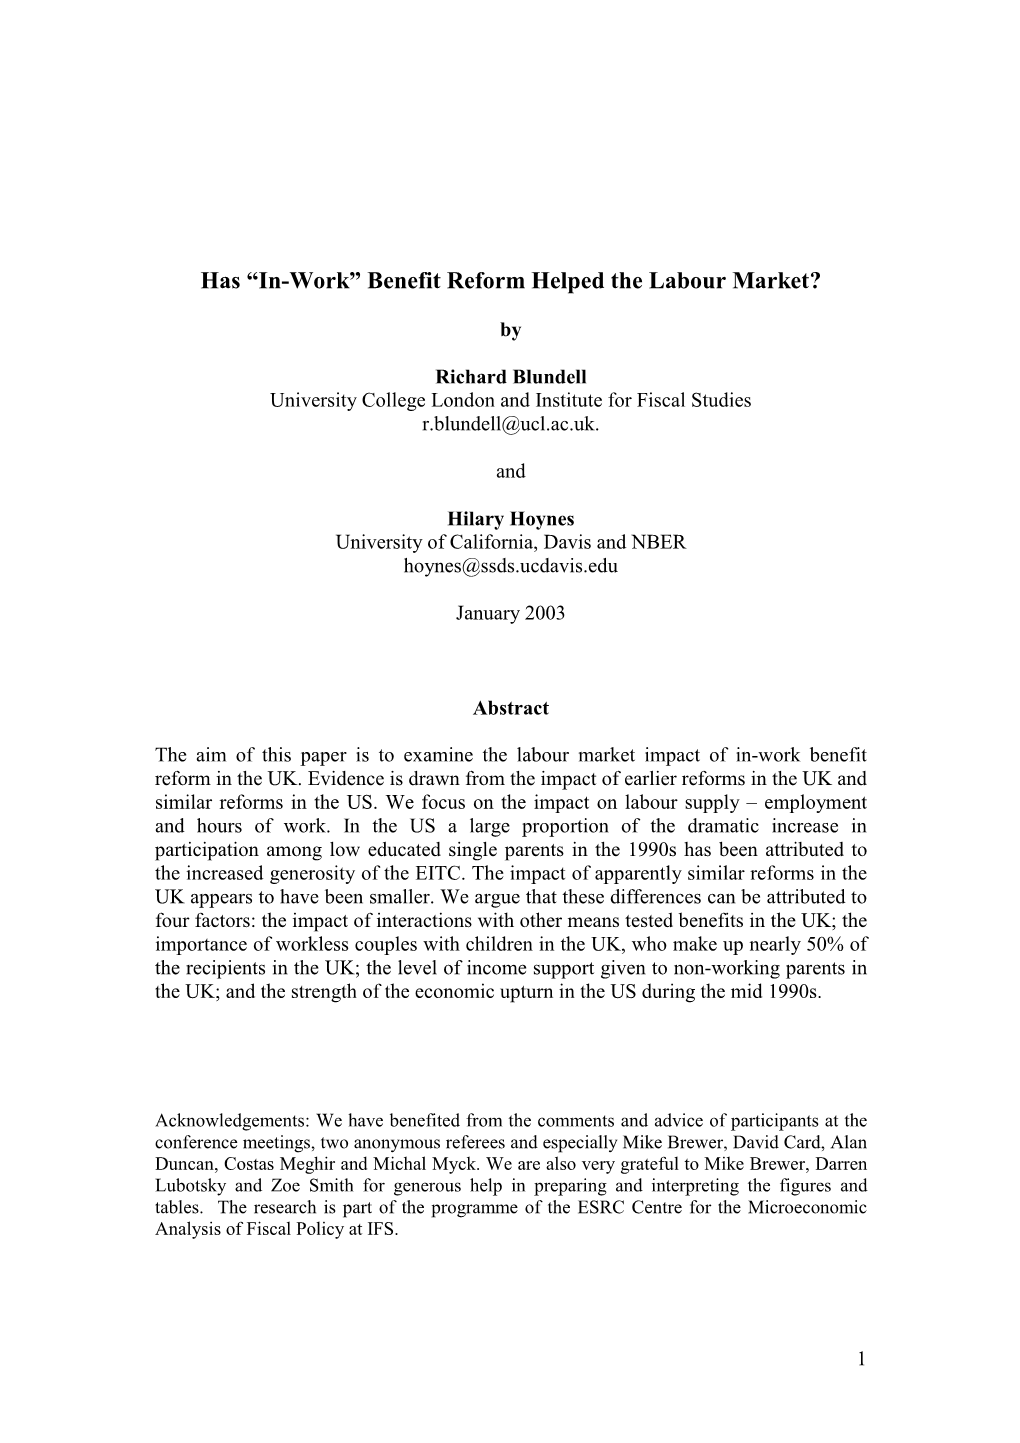 Has “In-Work” Benefit Reform Helped the Labour Market?